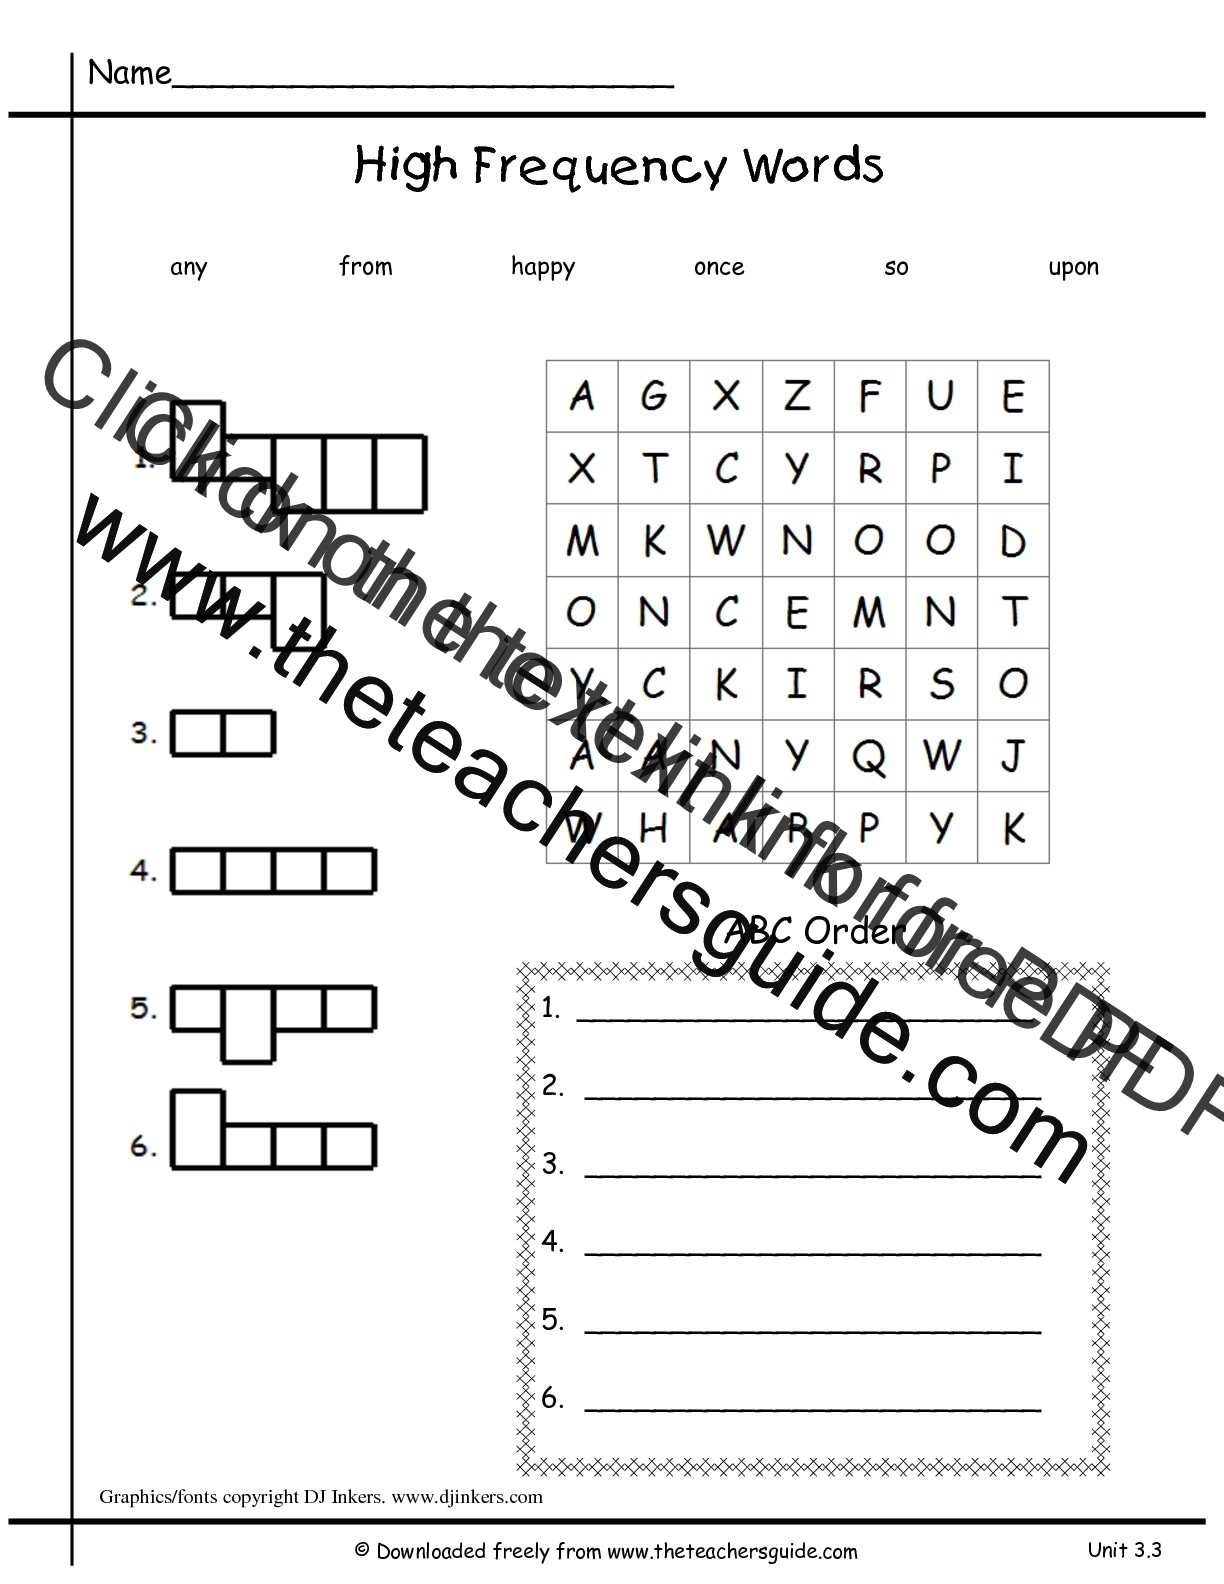 abc sheet word unit words three grade high  wonders worksheets week frequency sight first order three